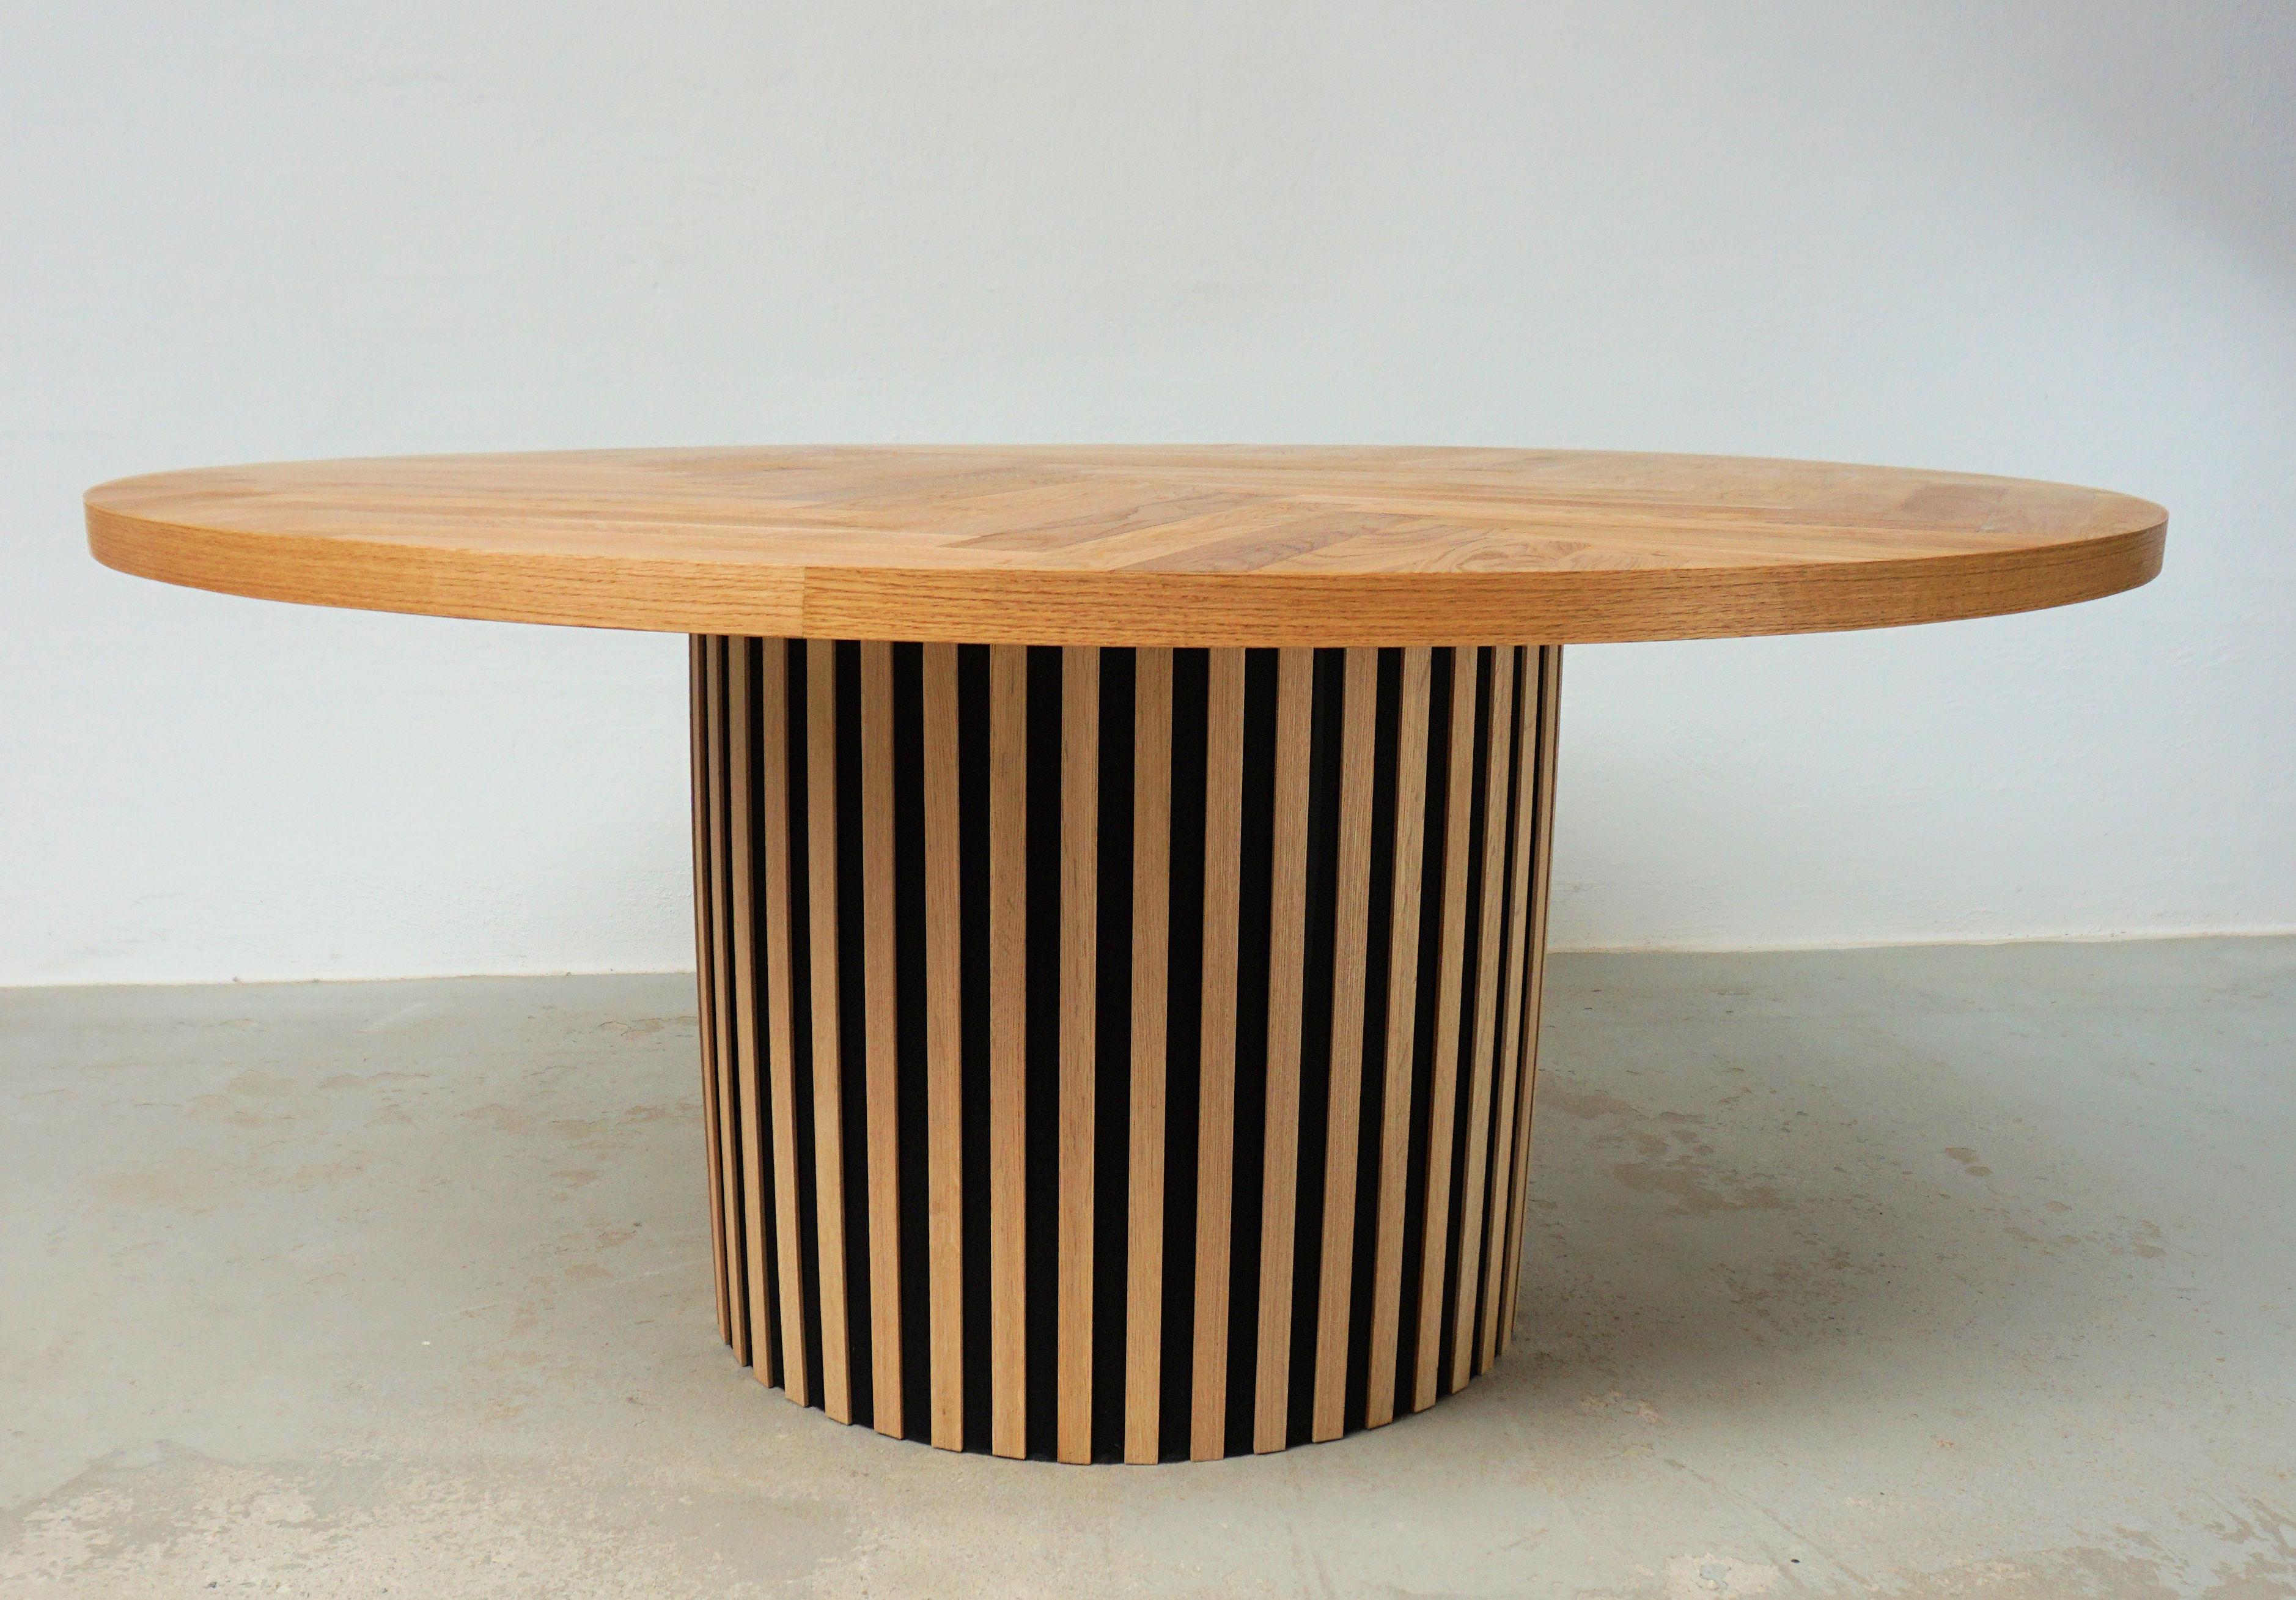 Hand-Crafted Danish Modernist Customizabel Handcrafted Circular Dining Table in Oak For Sale